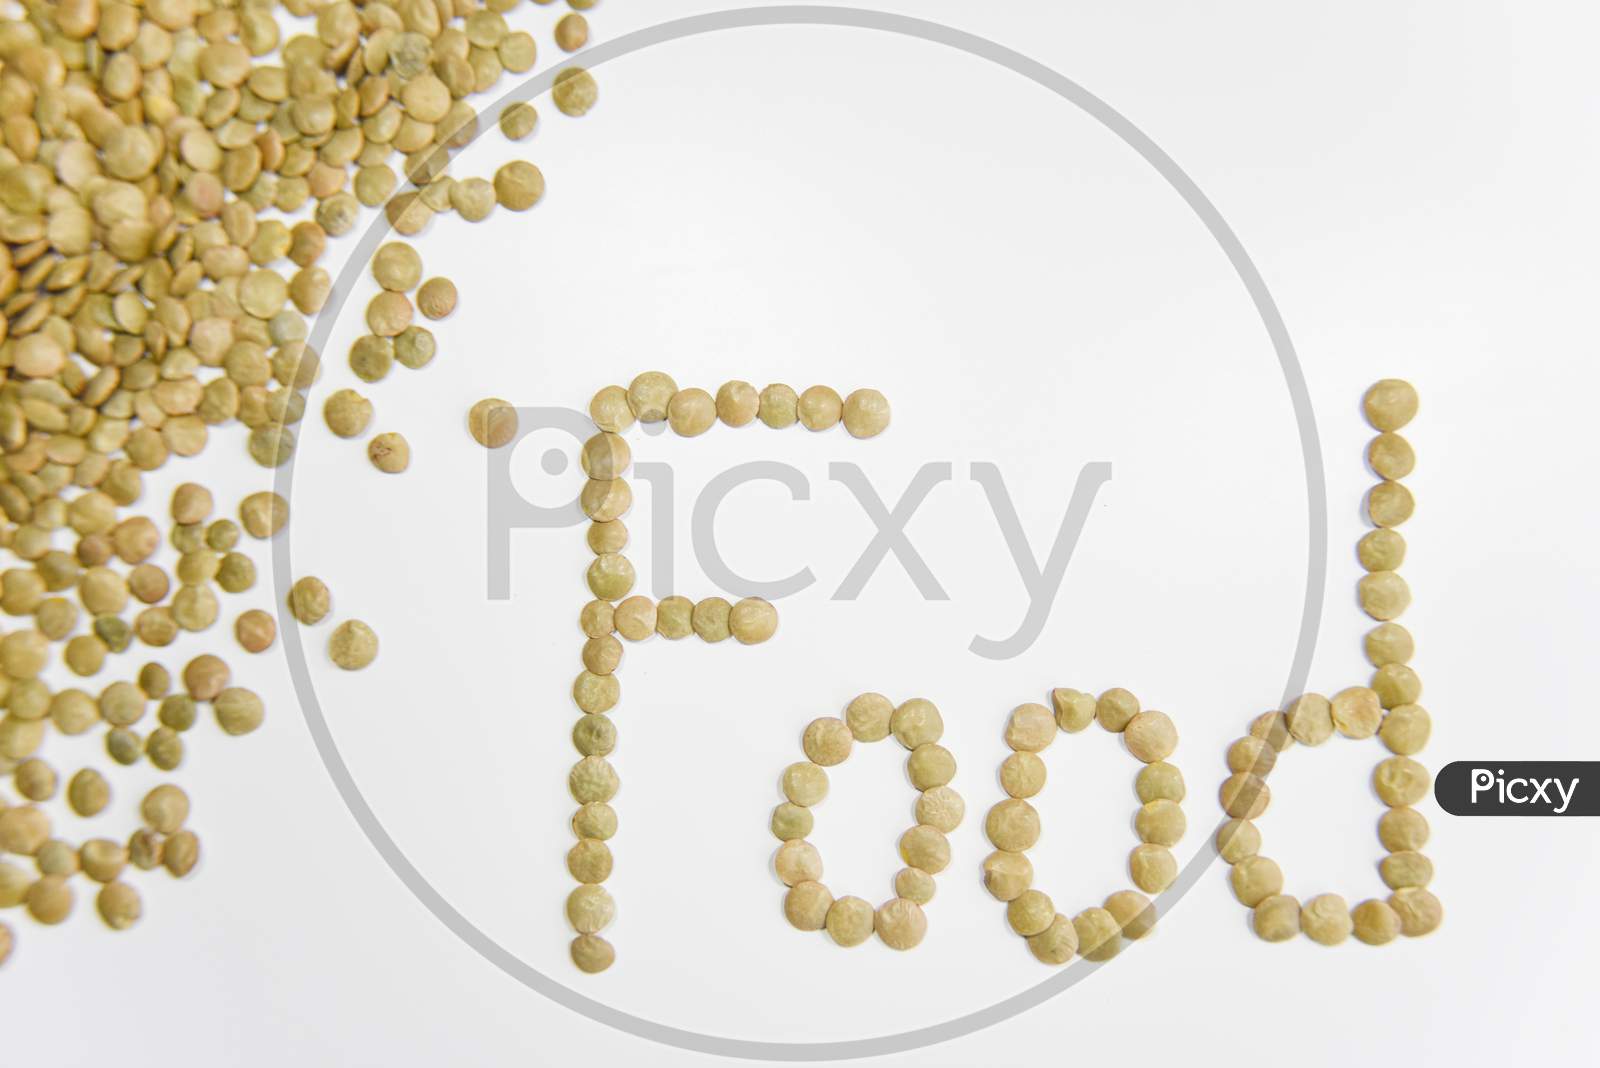 The Word Food Assembled With Grains Of Lentil On The White Background. Selective Focus. Healthy Eating Concept.